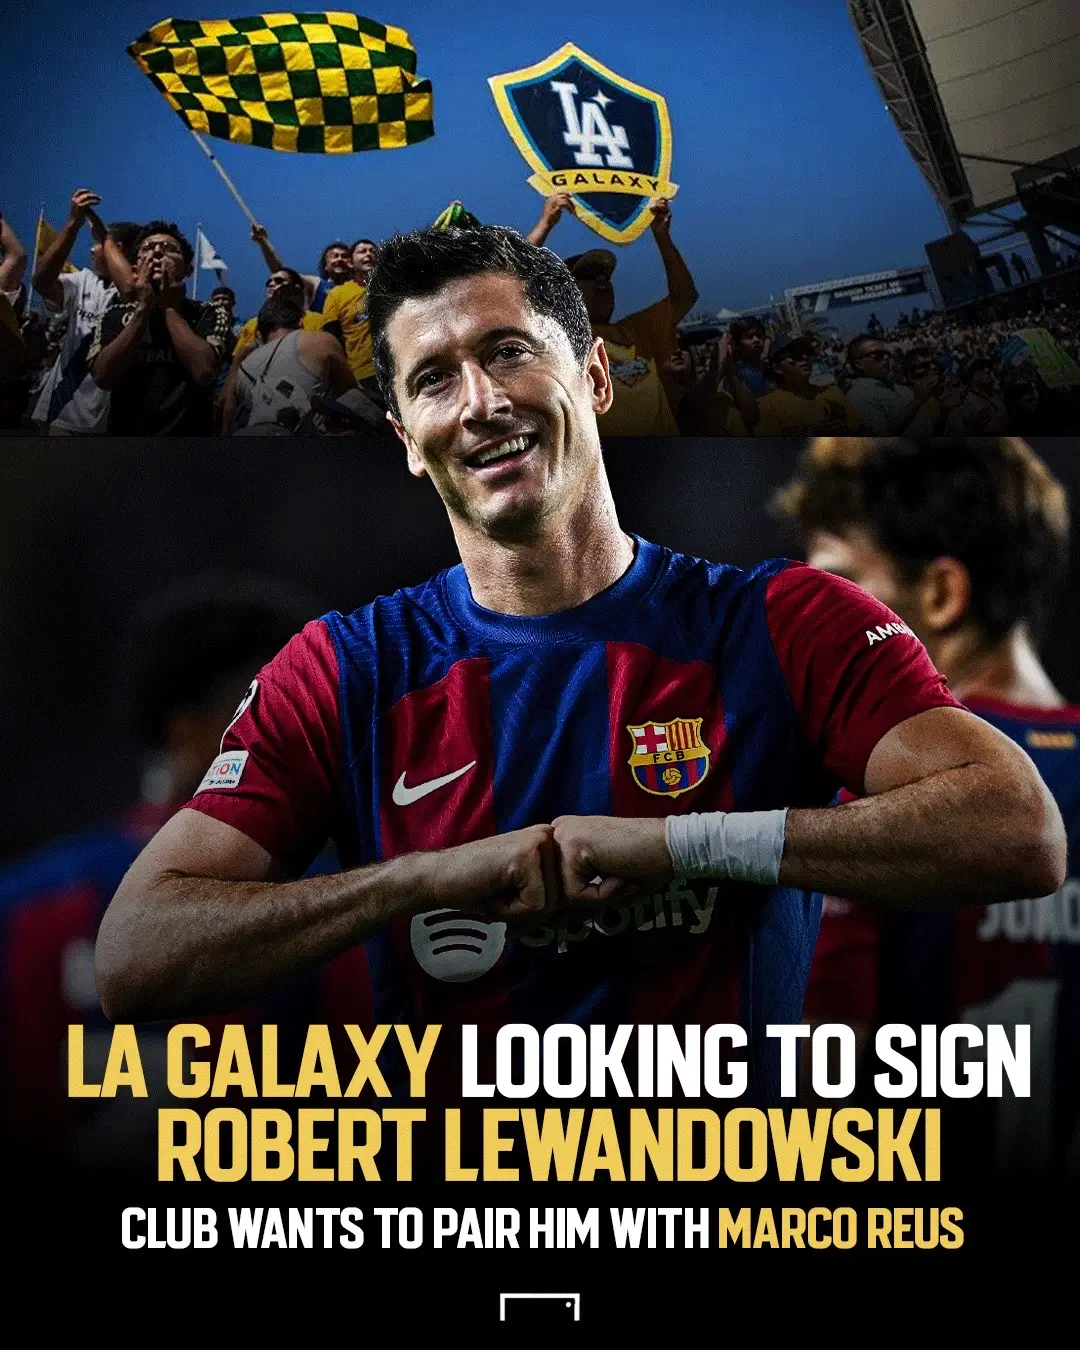 The LA Galaxy are in the final steps of locking in Marco Reus, but it sounds like they aren’t done yet as they are targeting his close friend Robert Lewandowski as well 👀 Would this be a good move for the Barcelona star? 🤔 #MLS #lagalaxy #football #Soccer #laliga 